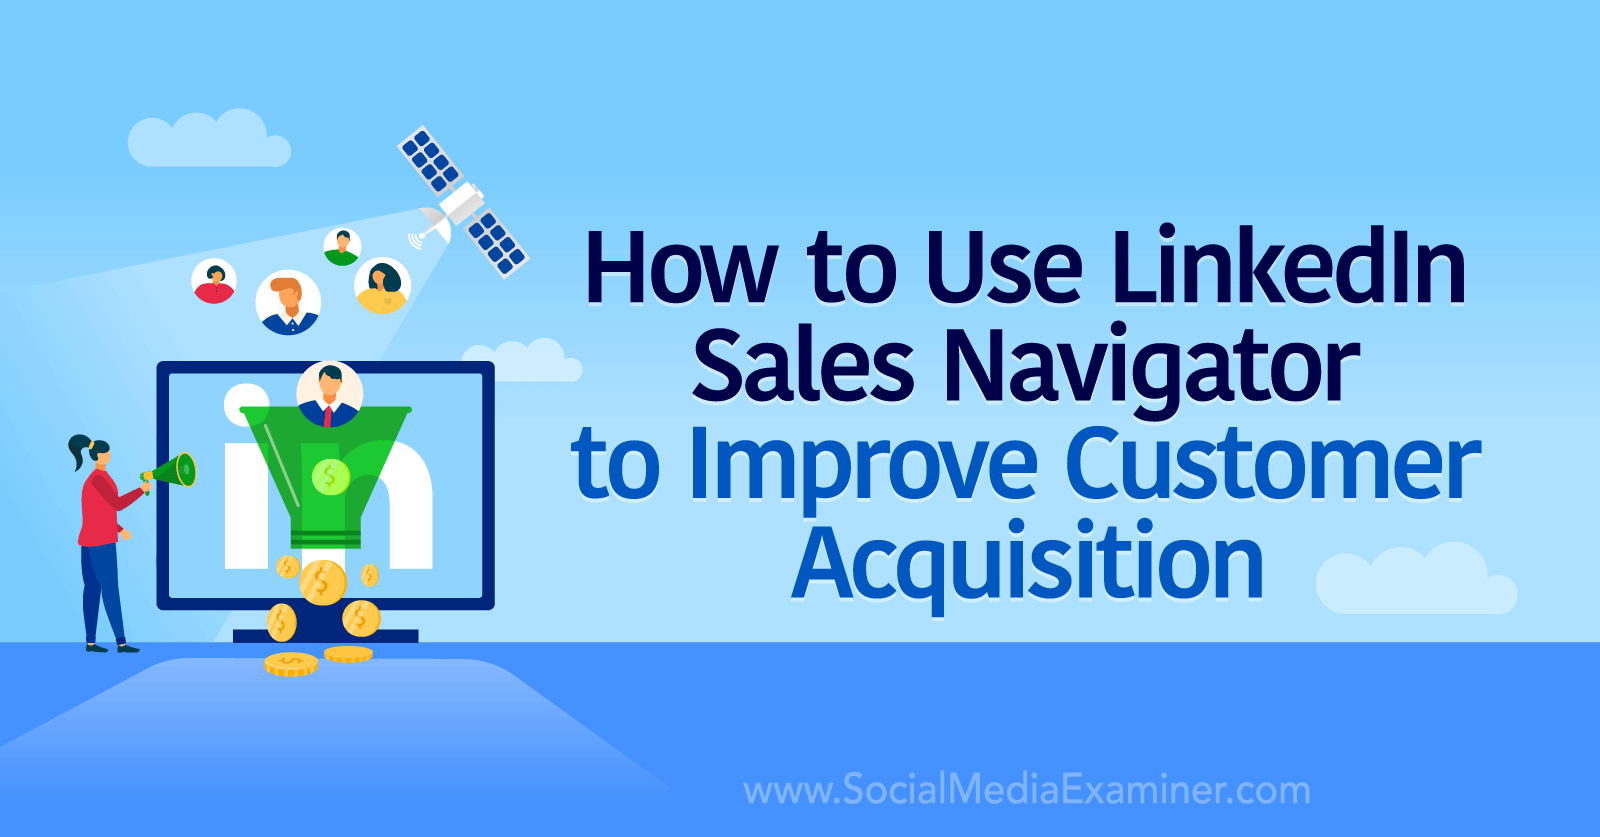 How to Use LinkedIn Sales Navigator to Improve Customer Acquisition by Social Media Examiner